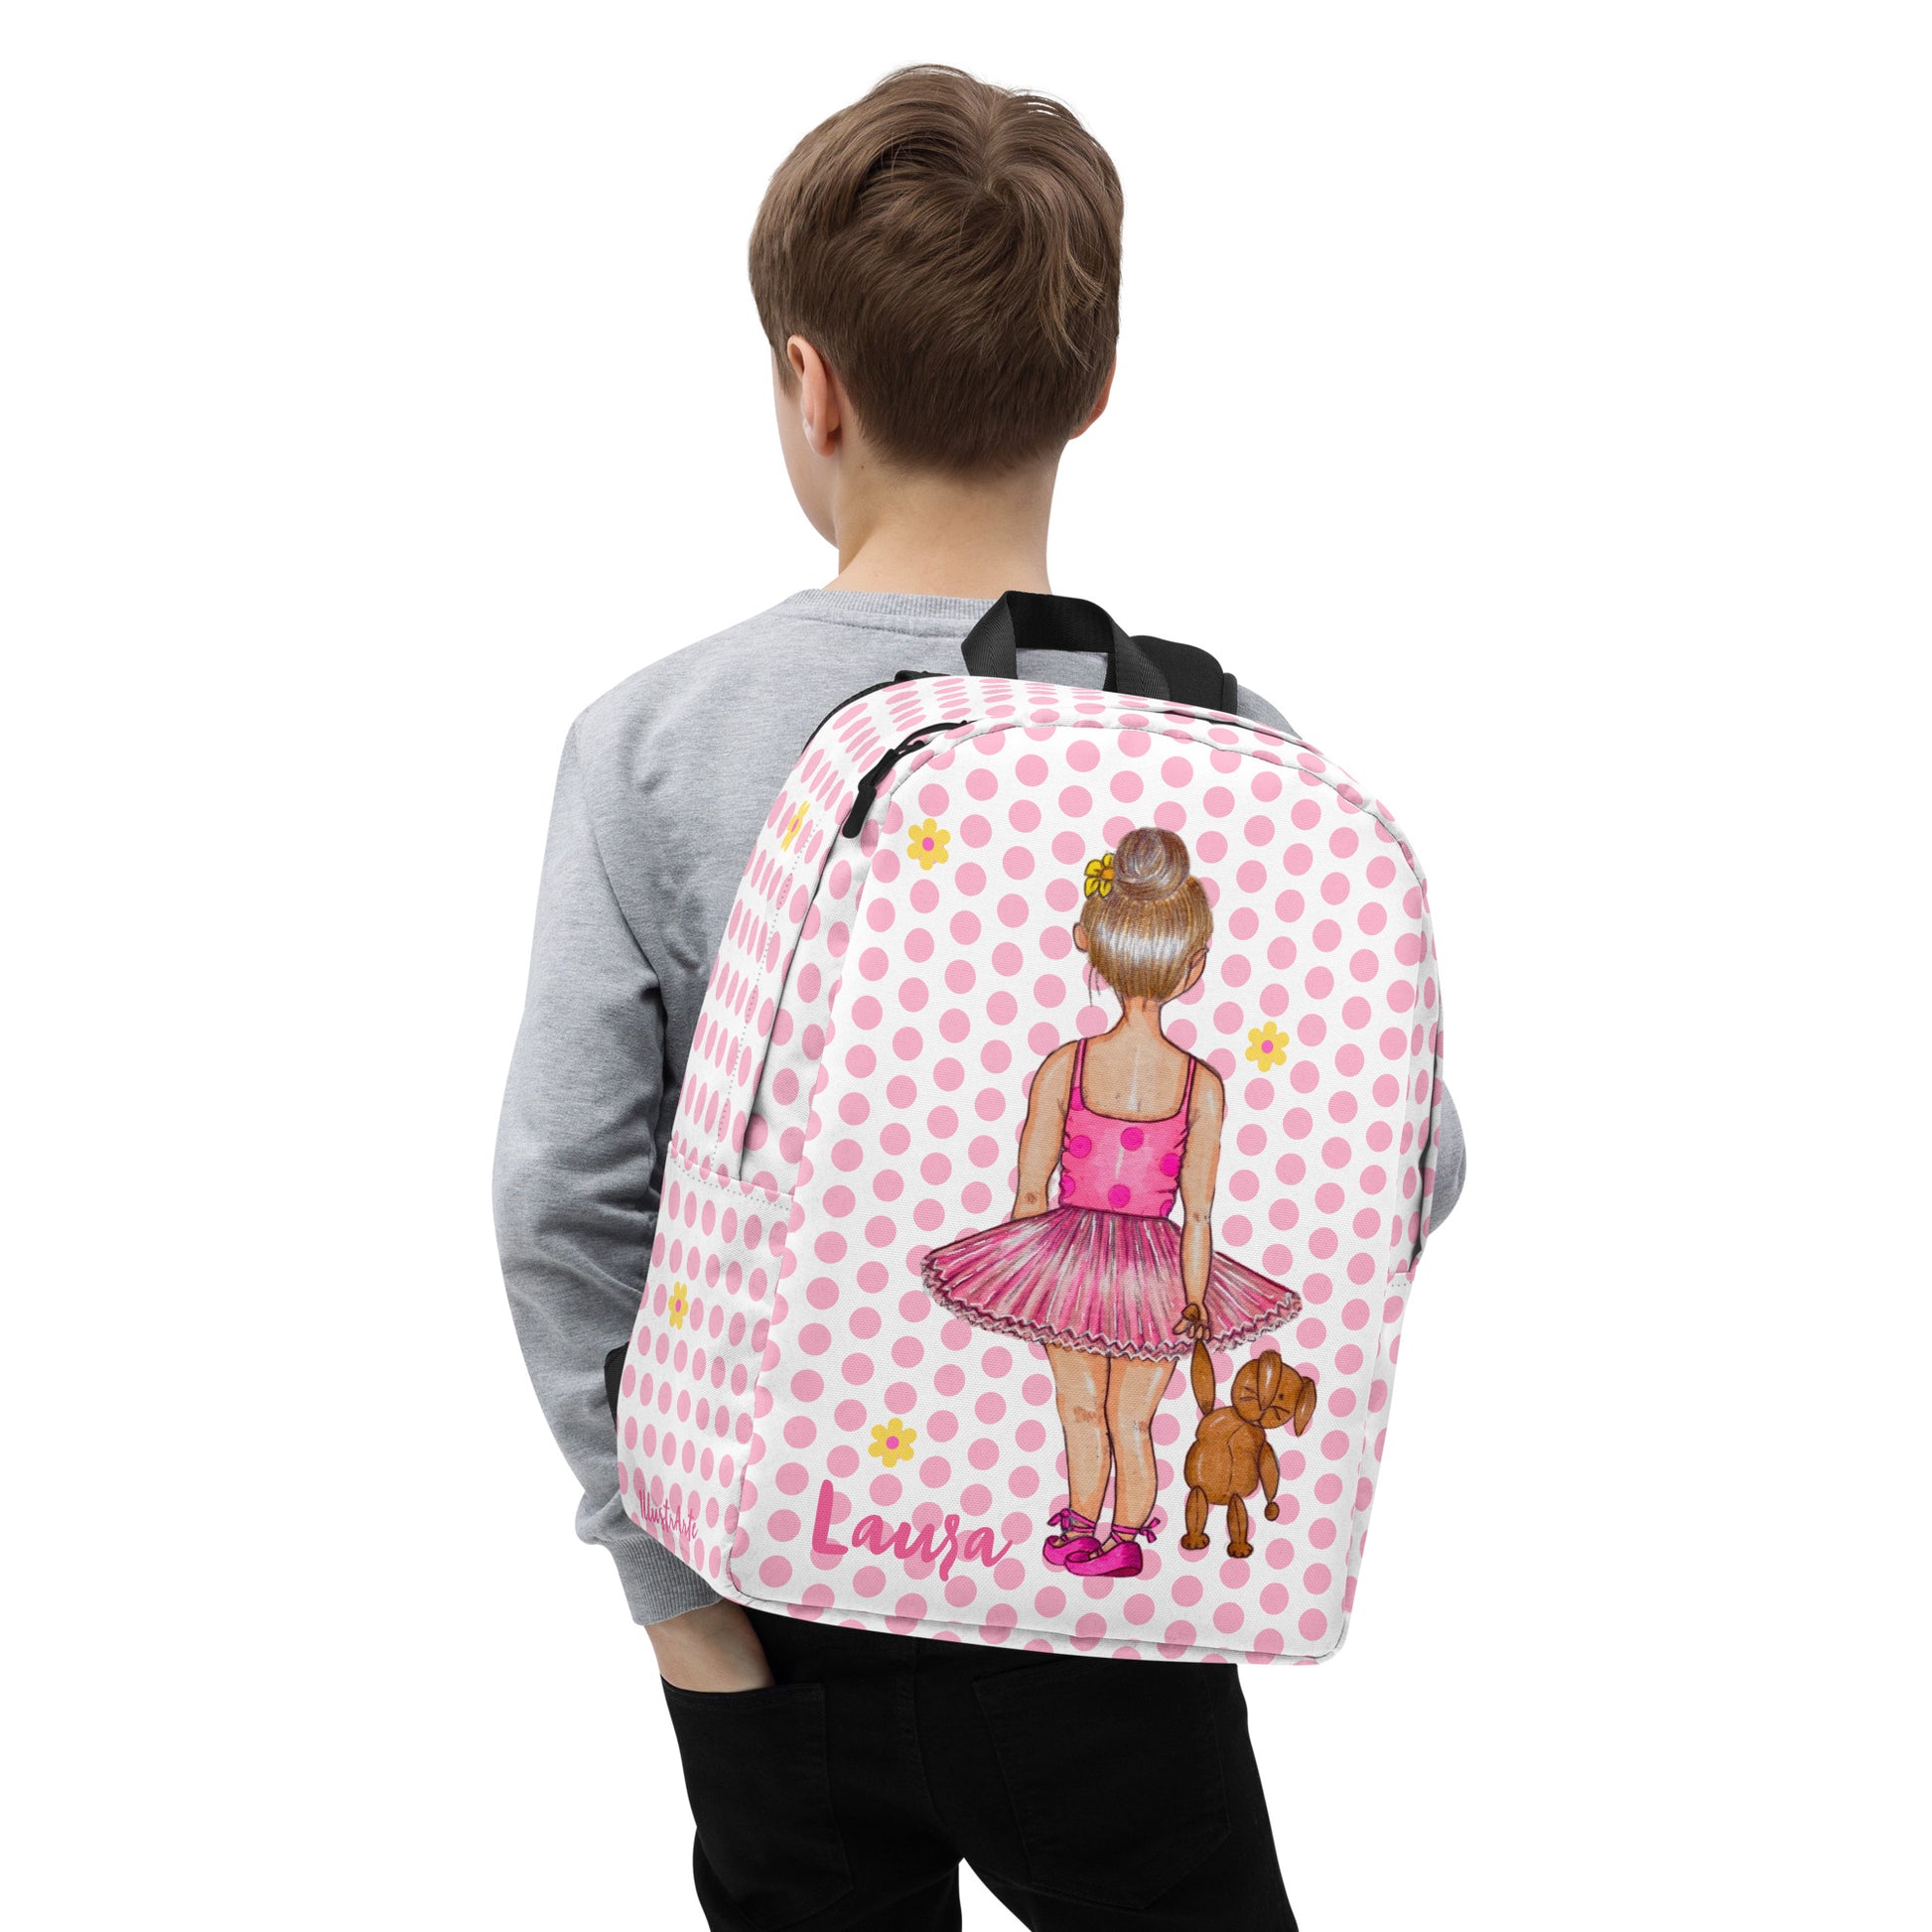 Ballerina girl Customizable Backpack, pink outfit with teddy bear design. - IllustrArte